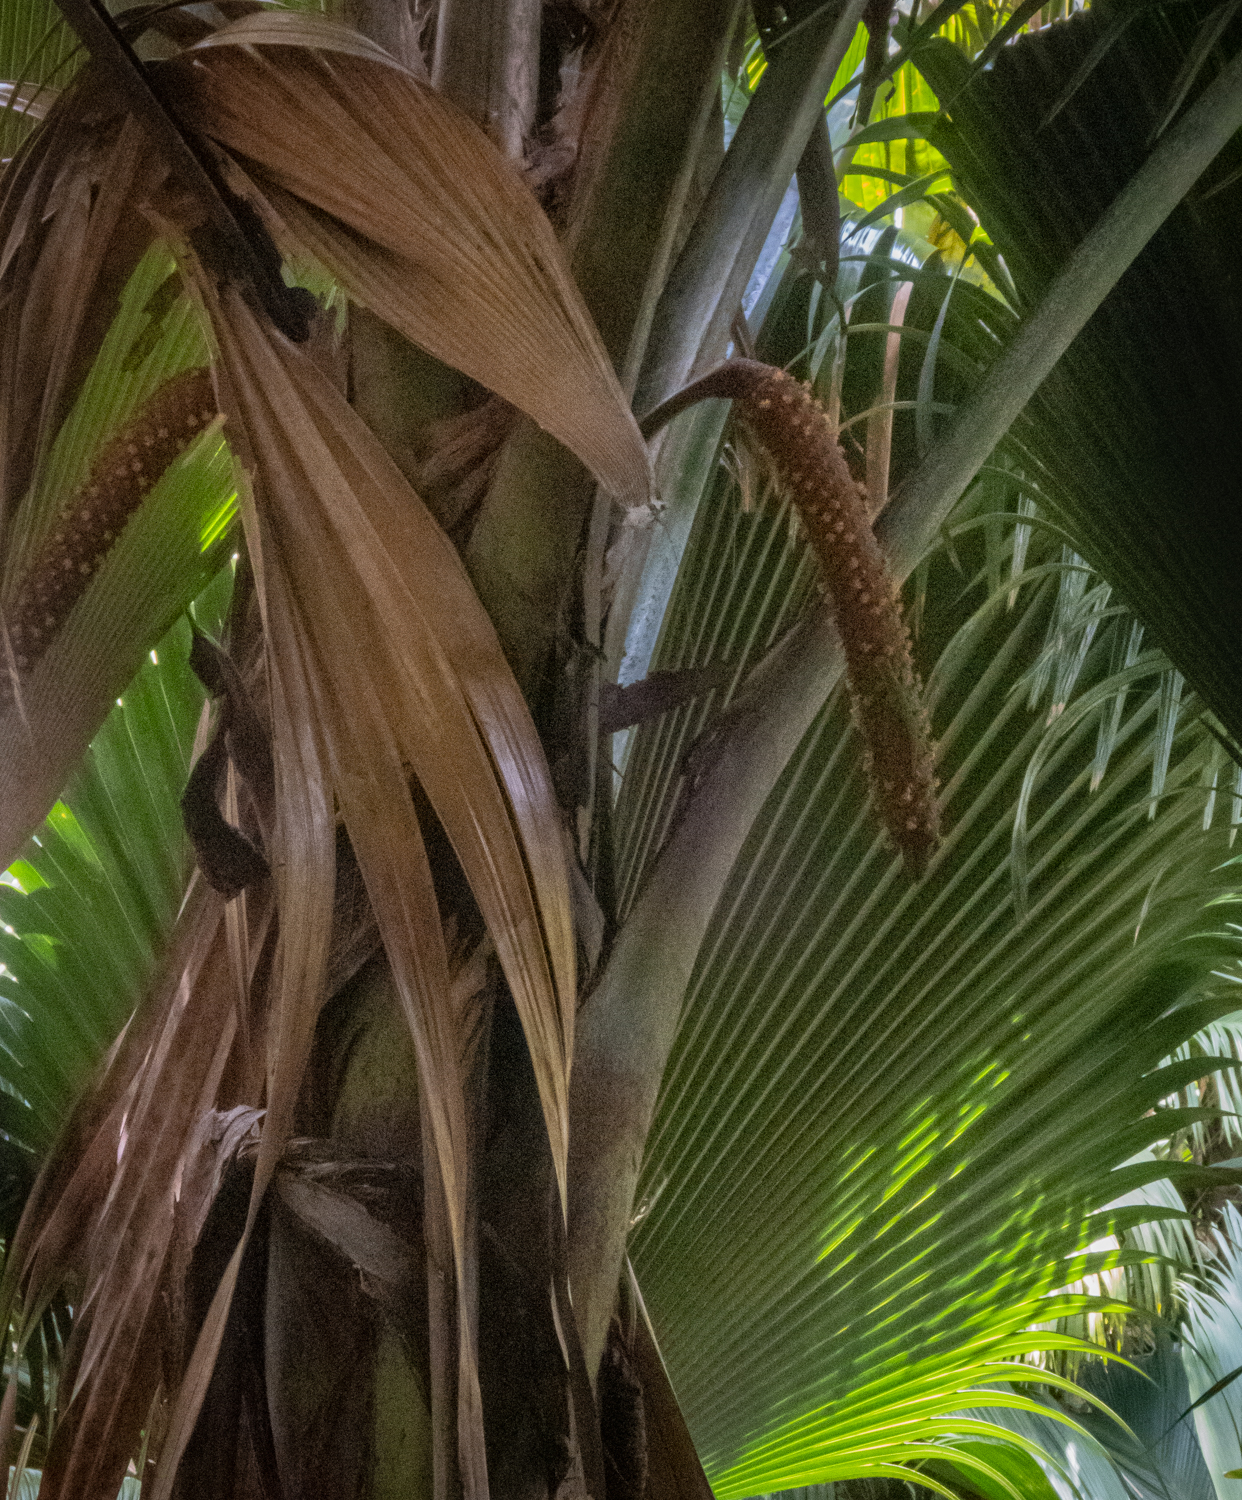 Coco de Mer palm tree | Where in the world is Riccardo?